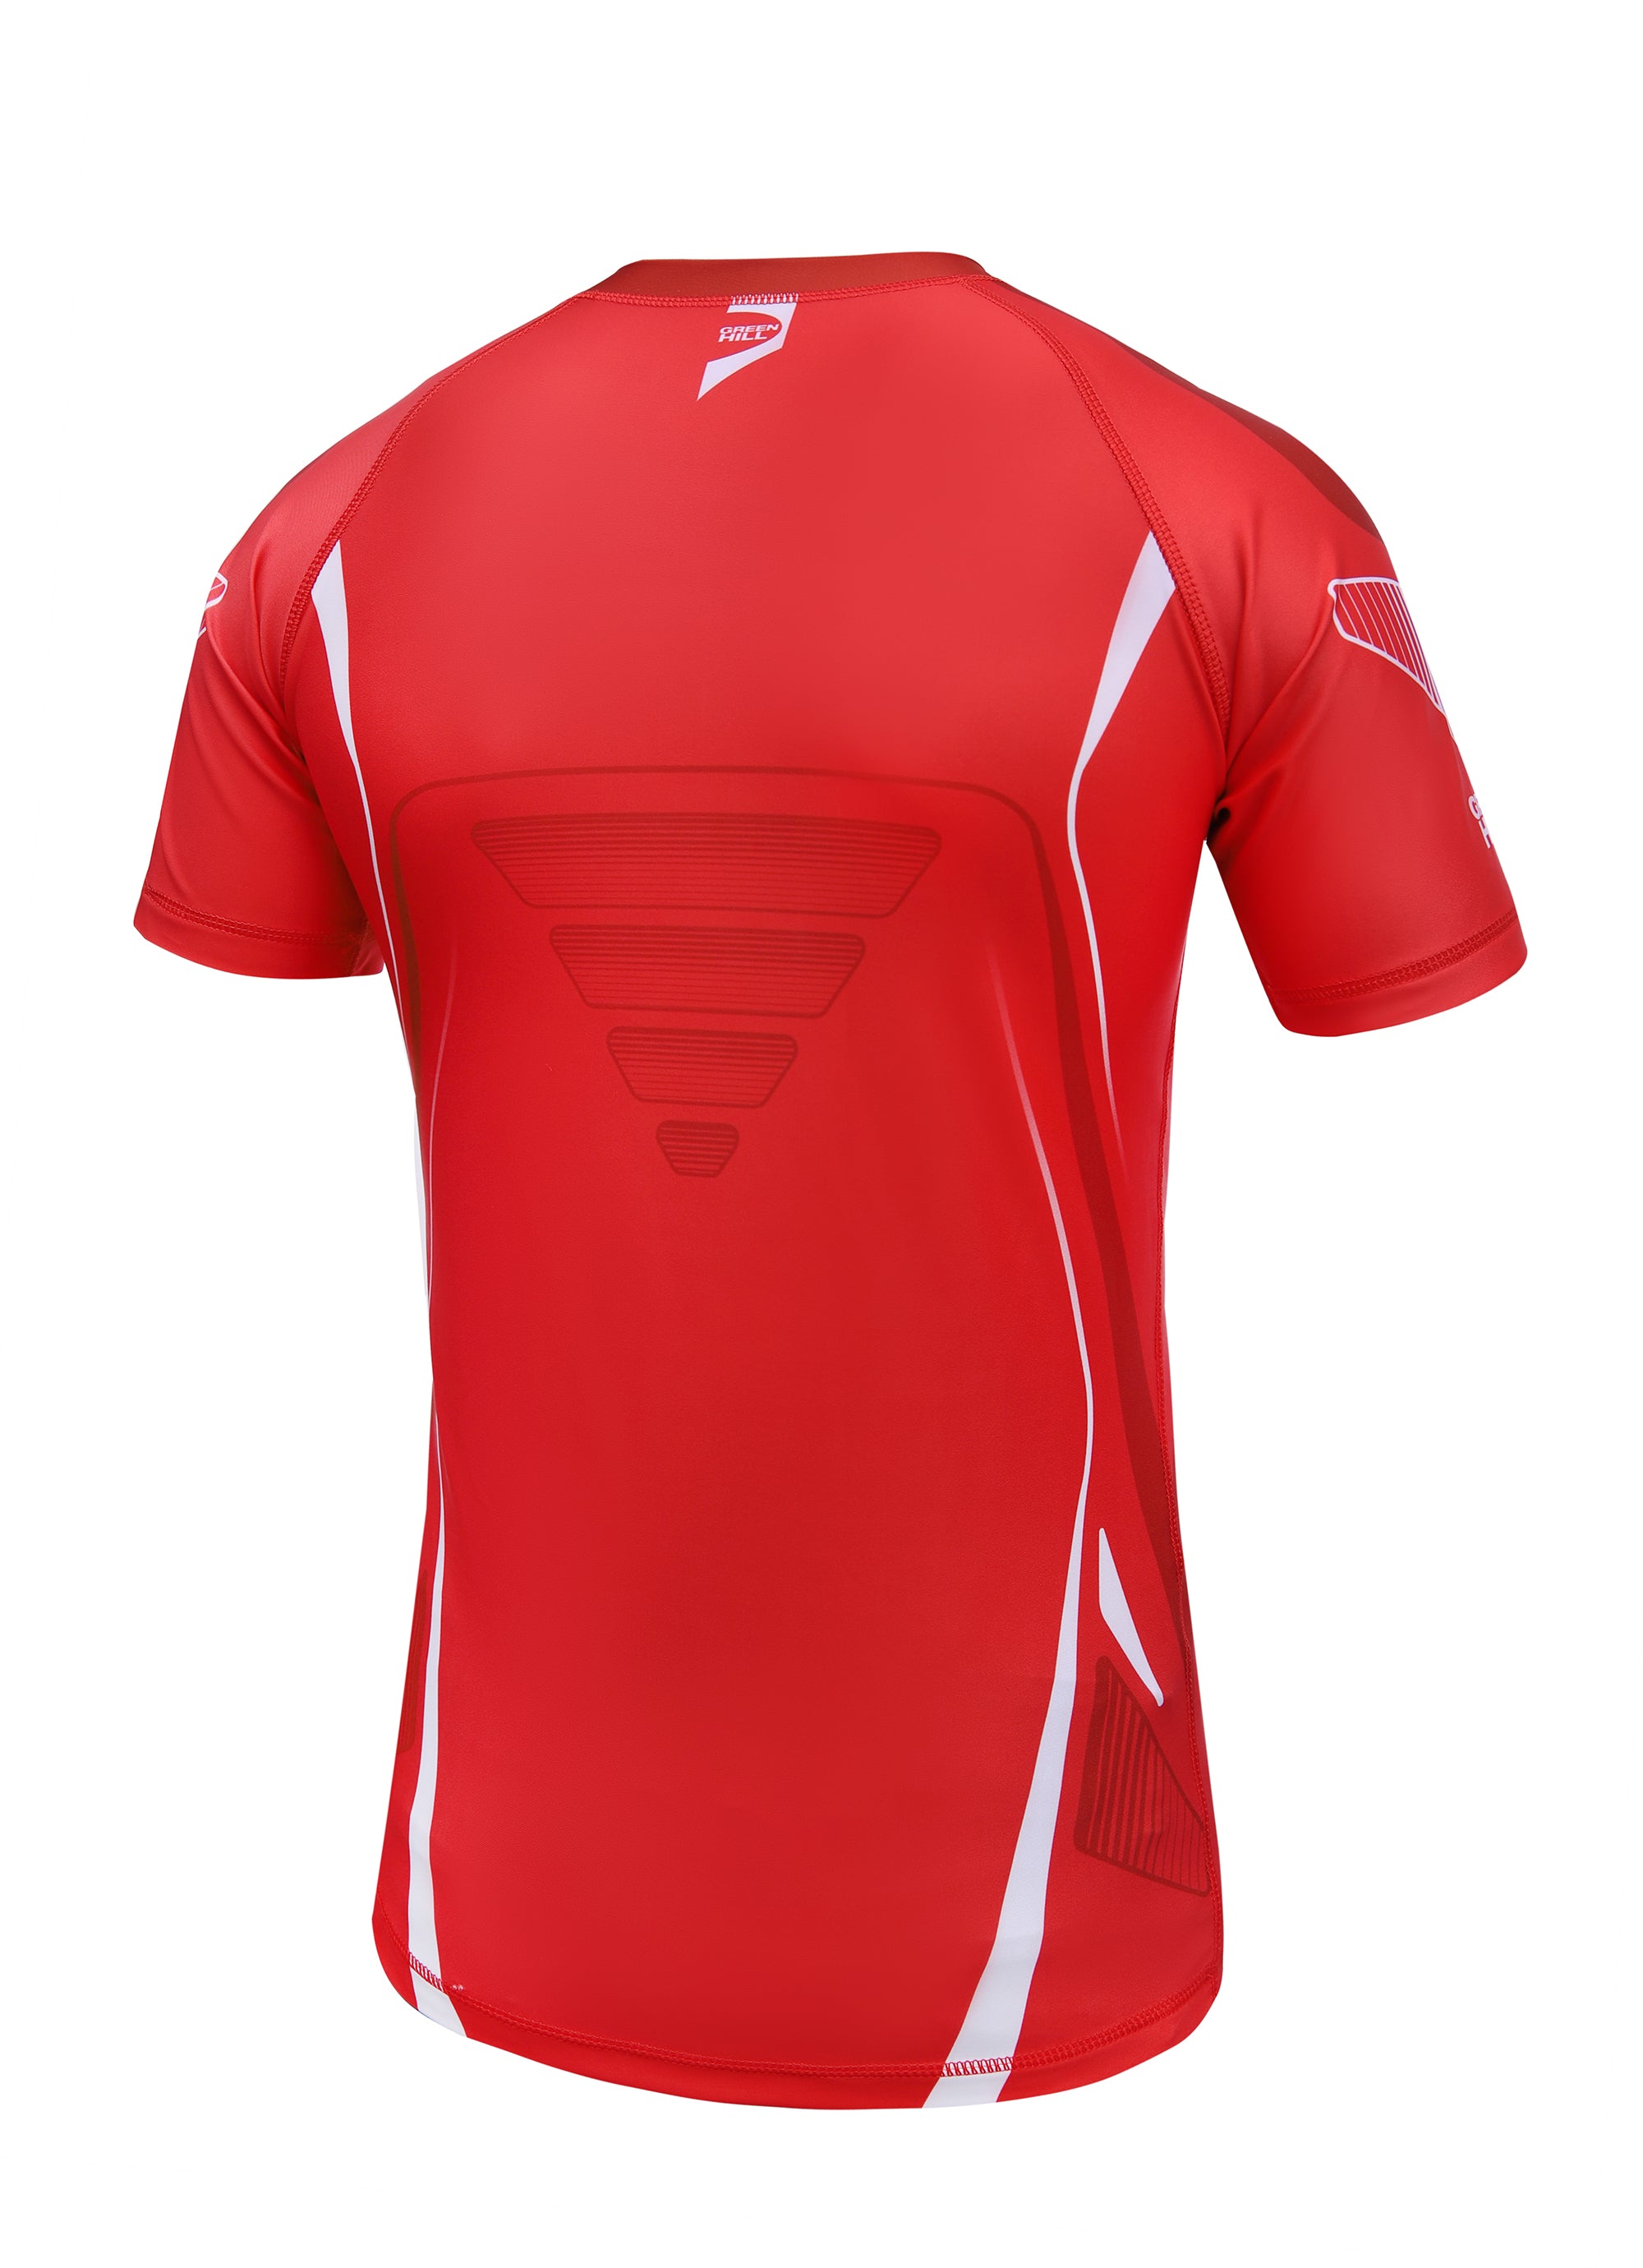 Green Hill IMMAF Approved Rash Guard Red 2023